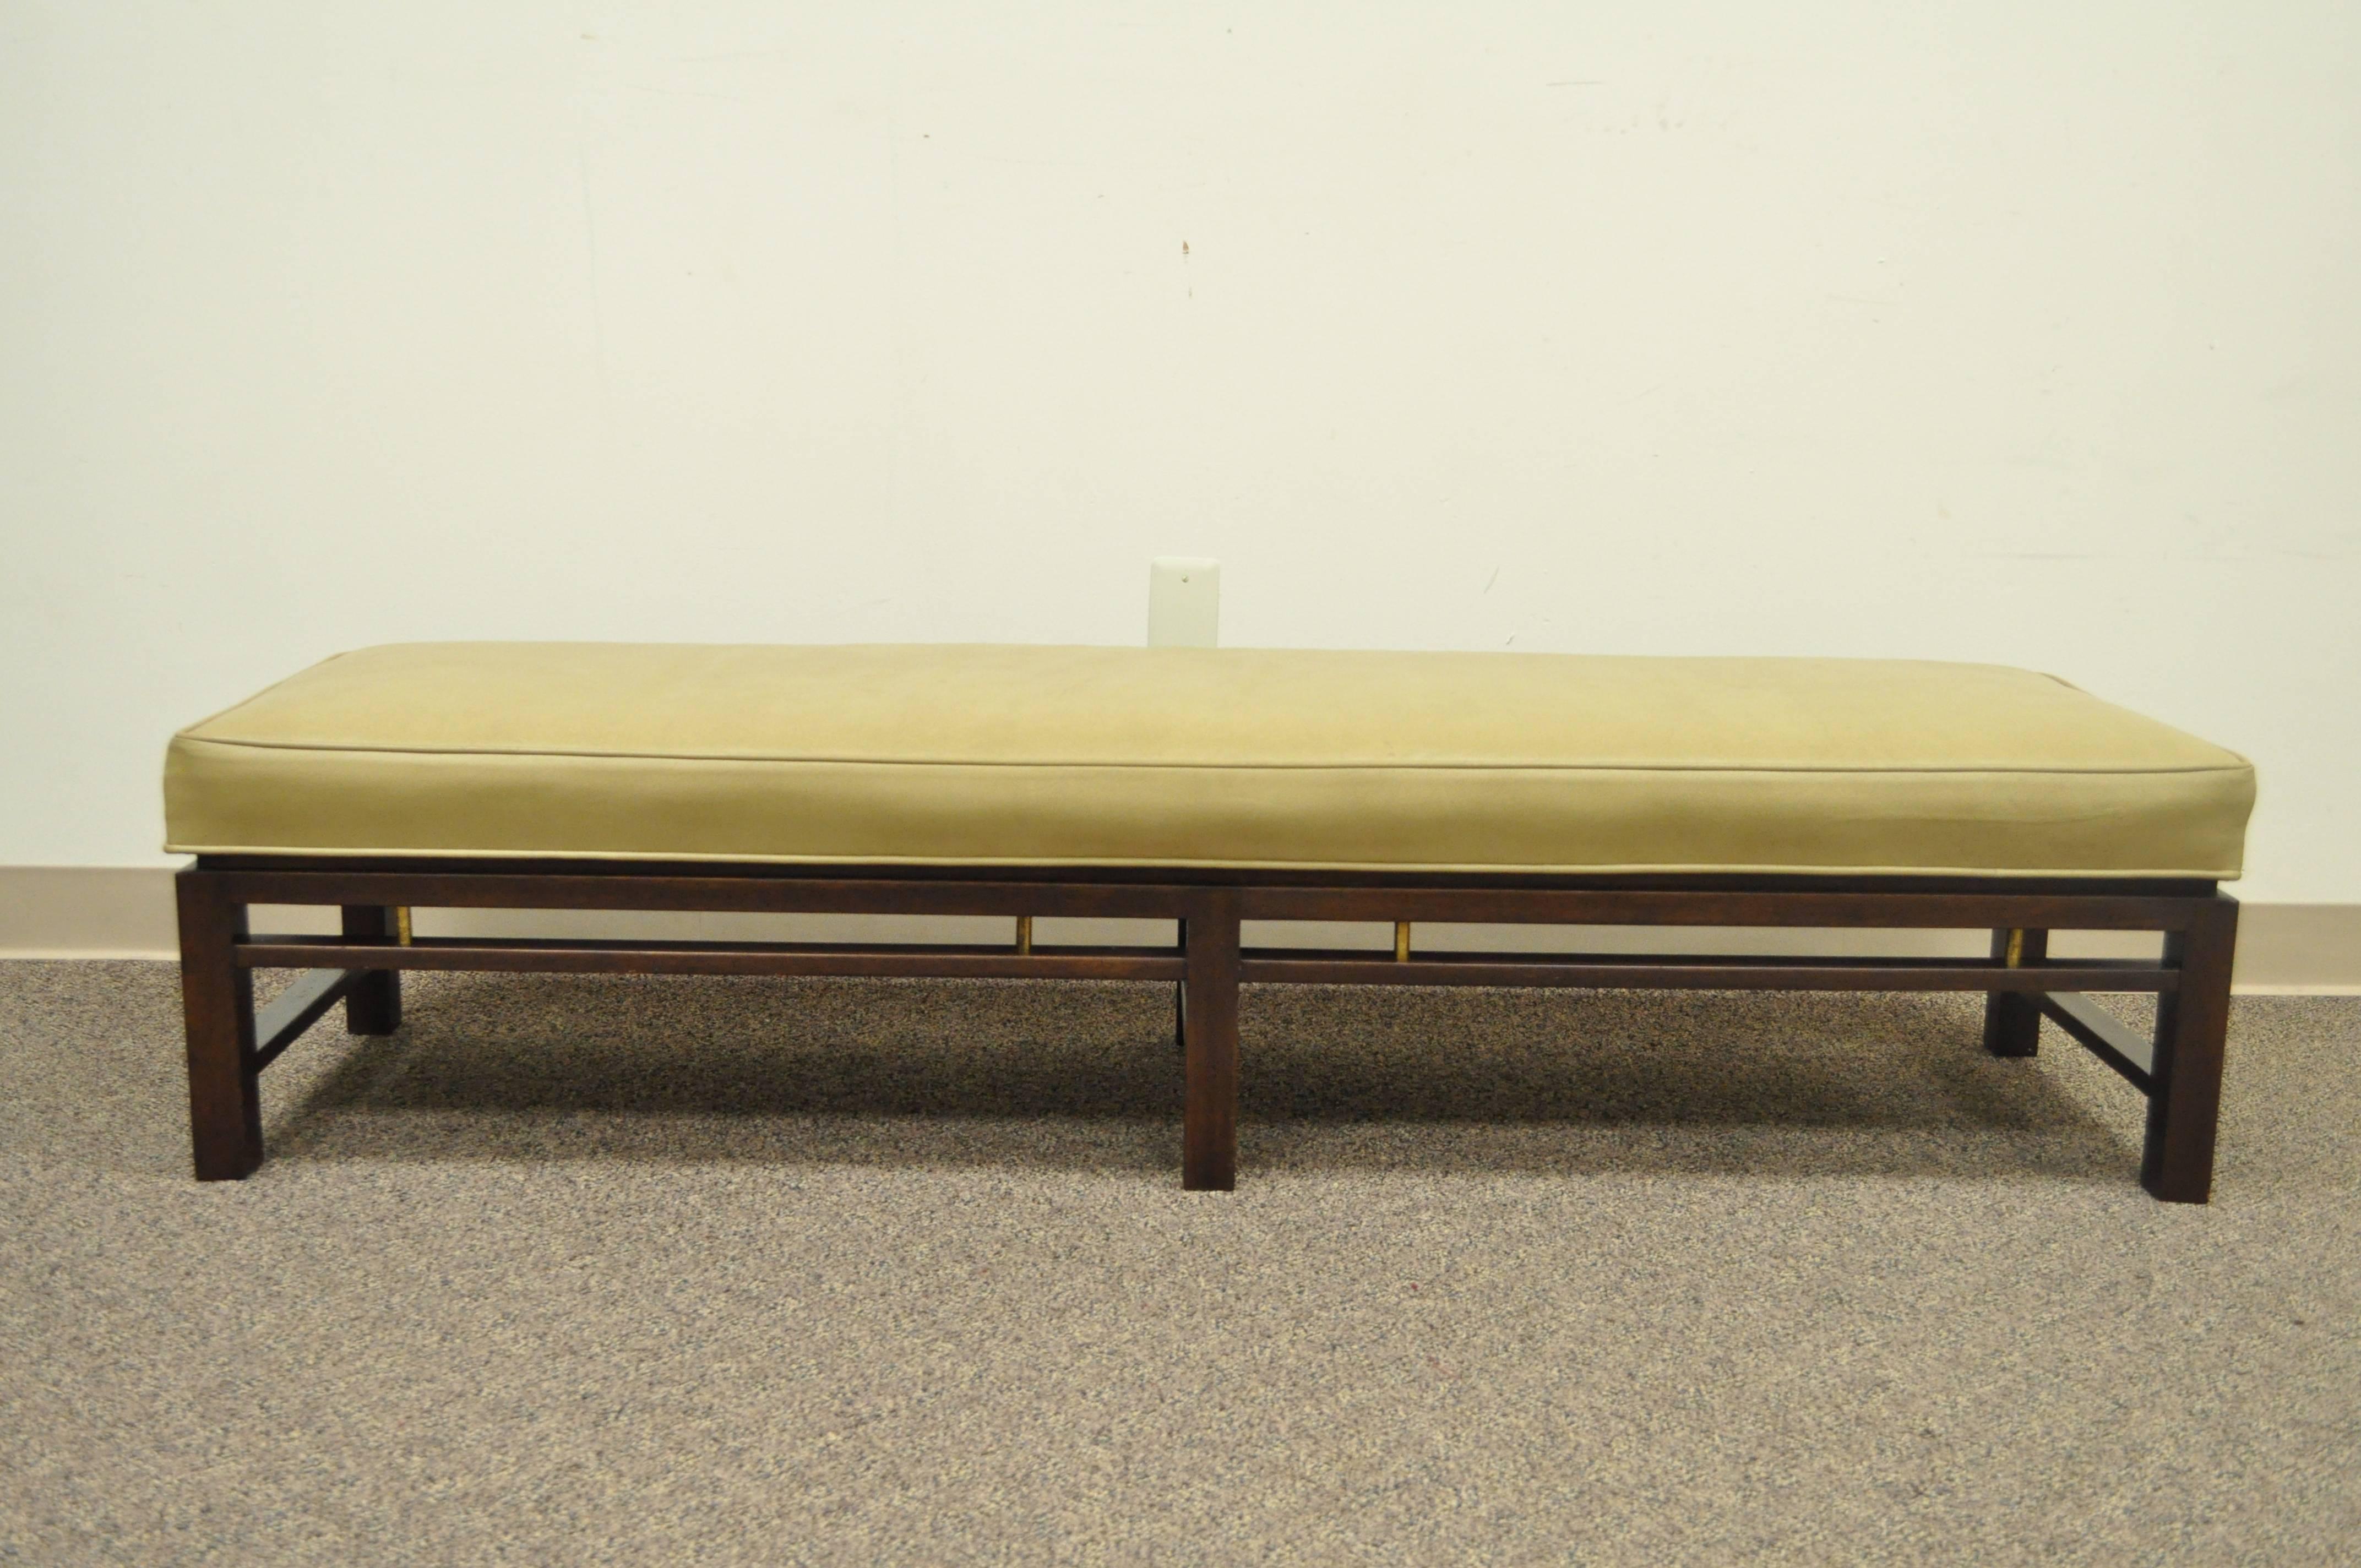 Original vintage Edward Wormley for Dunbar leather upholstered solid mahogany six-leg bench with brass accents. 